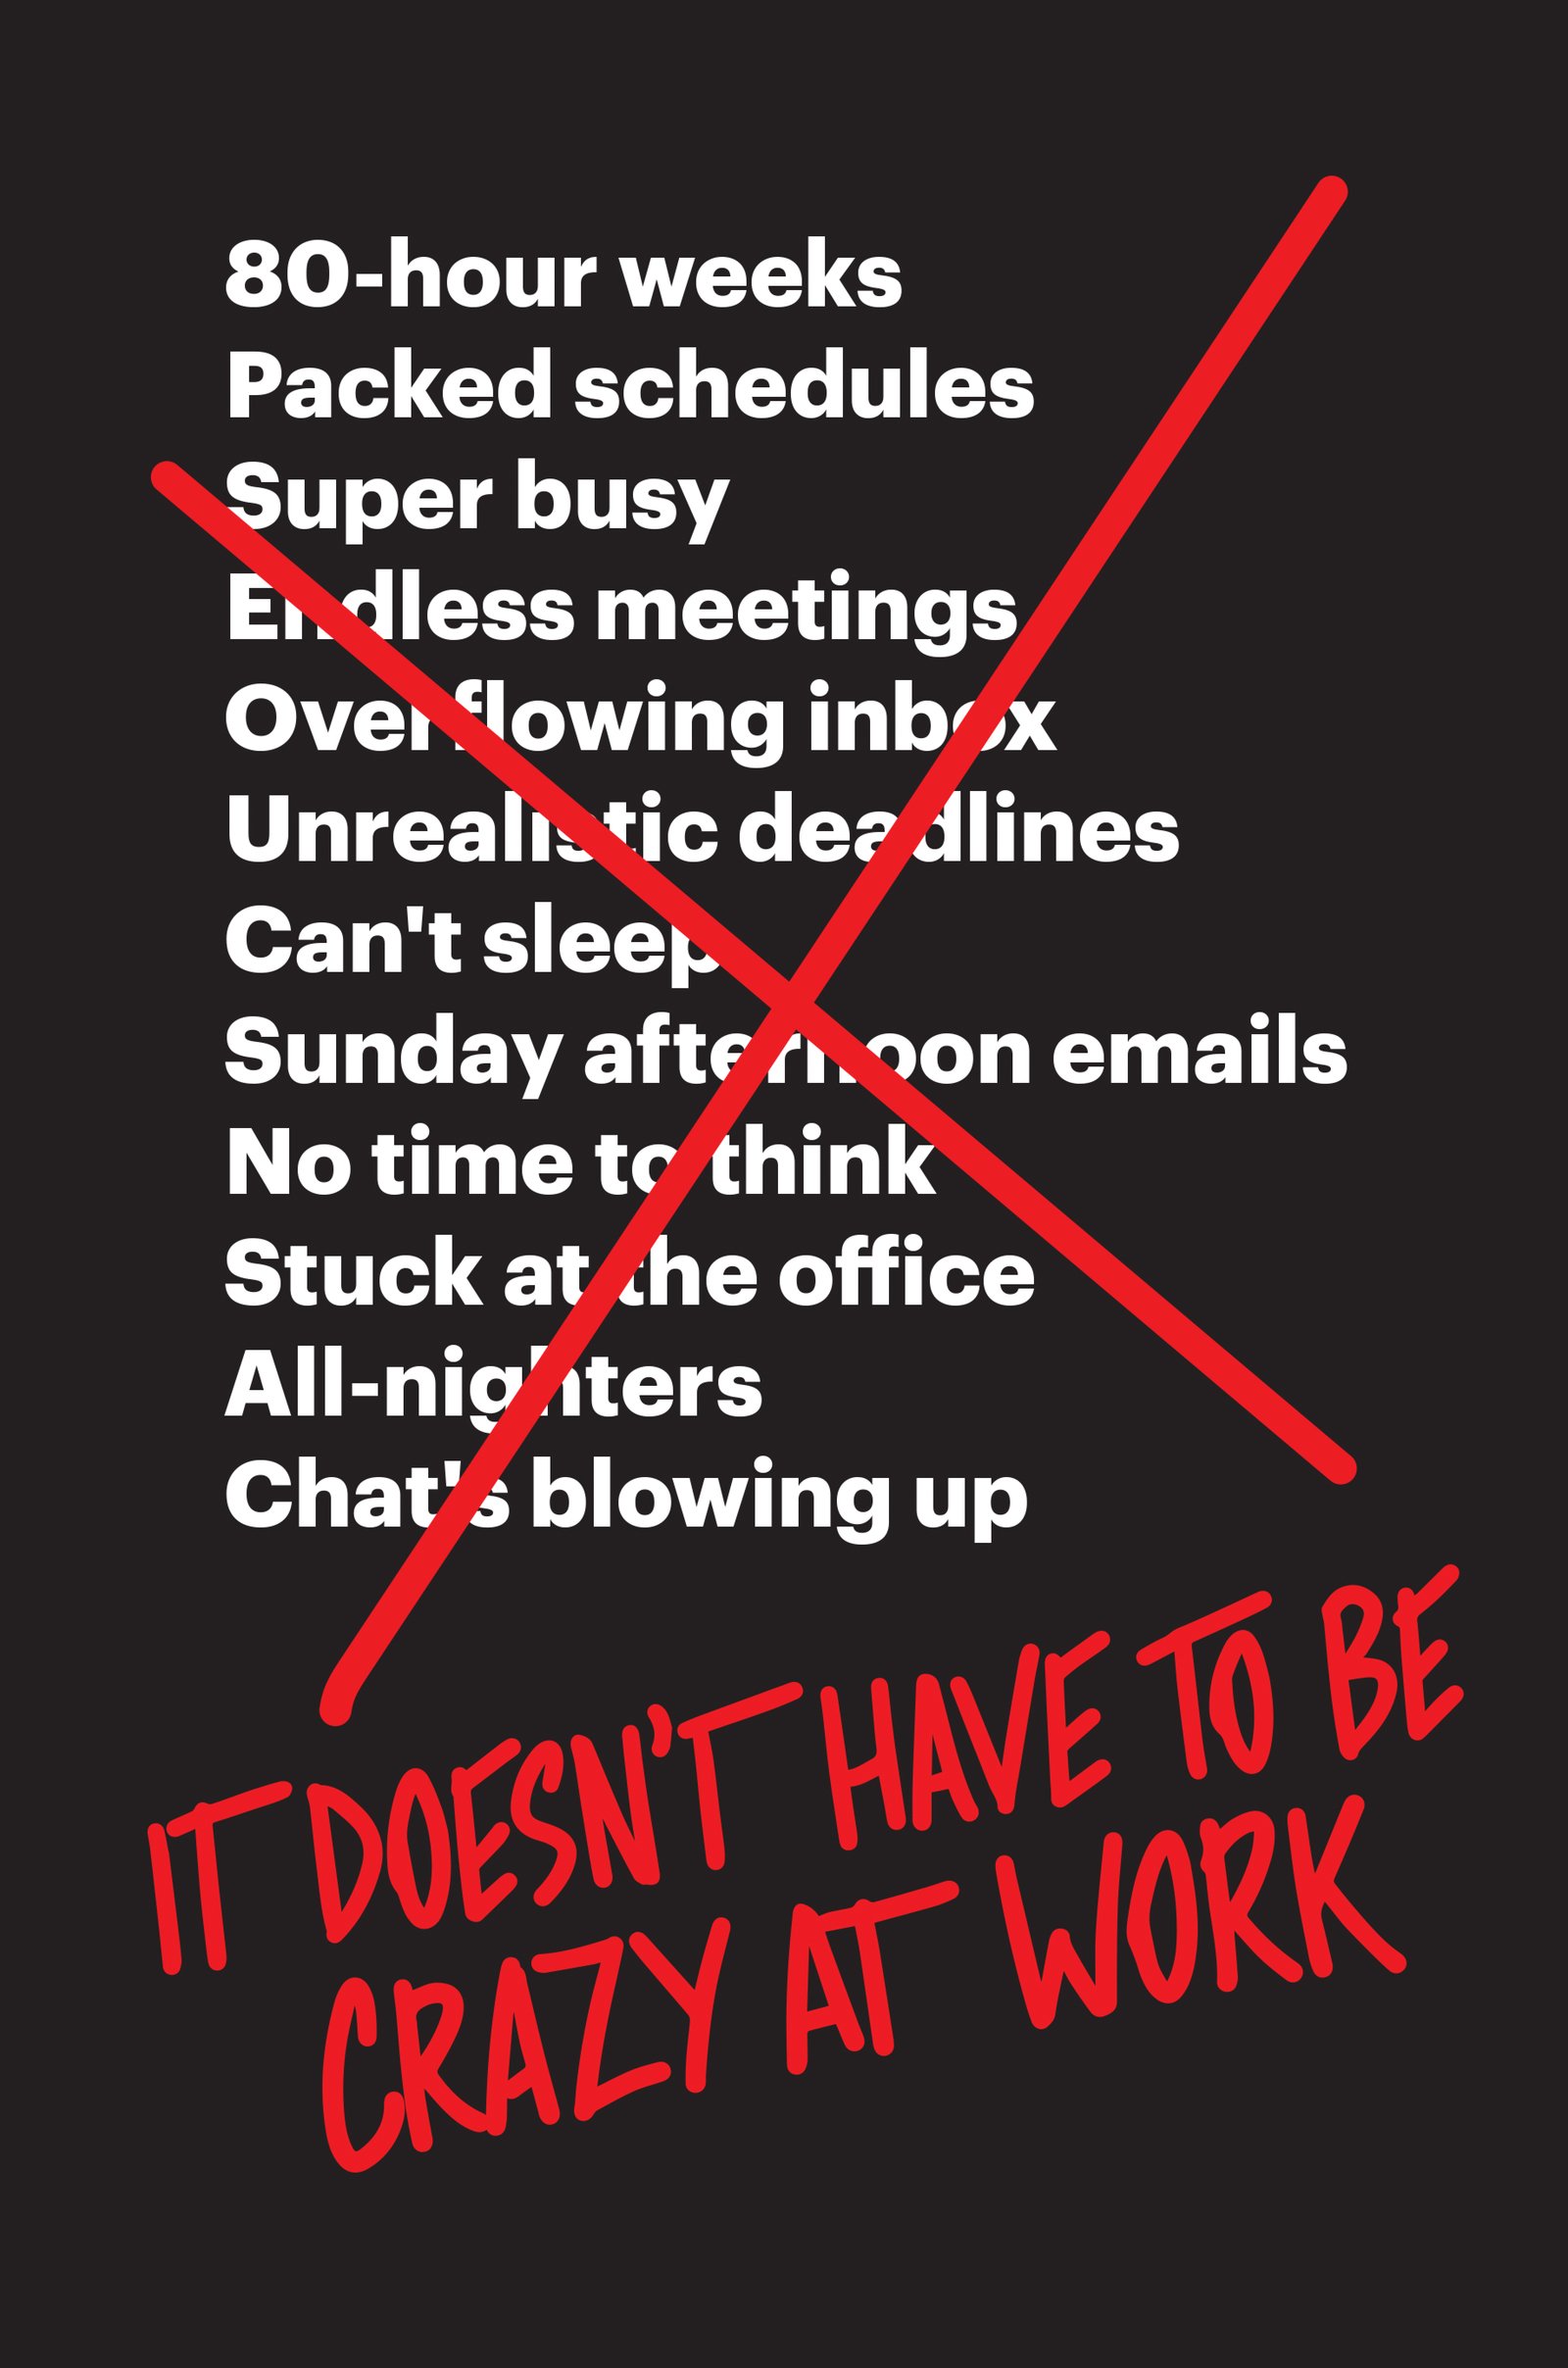 It doesn't have to be crazy at work by Jason Fried & David Heinemeier Hansson